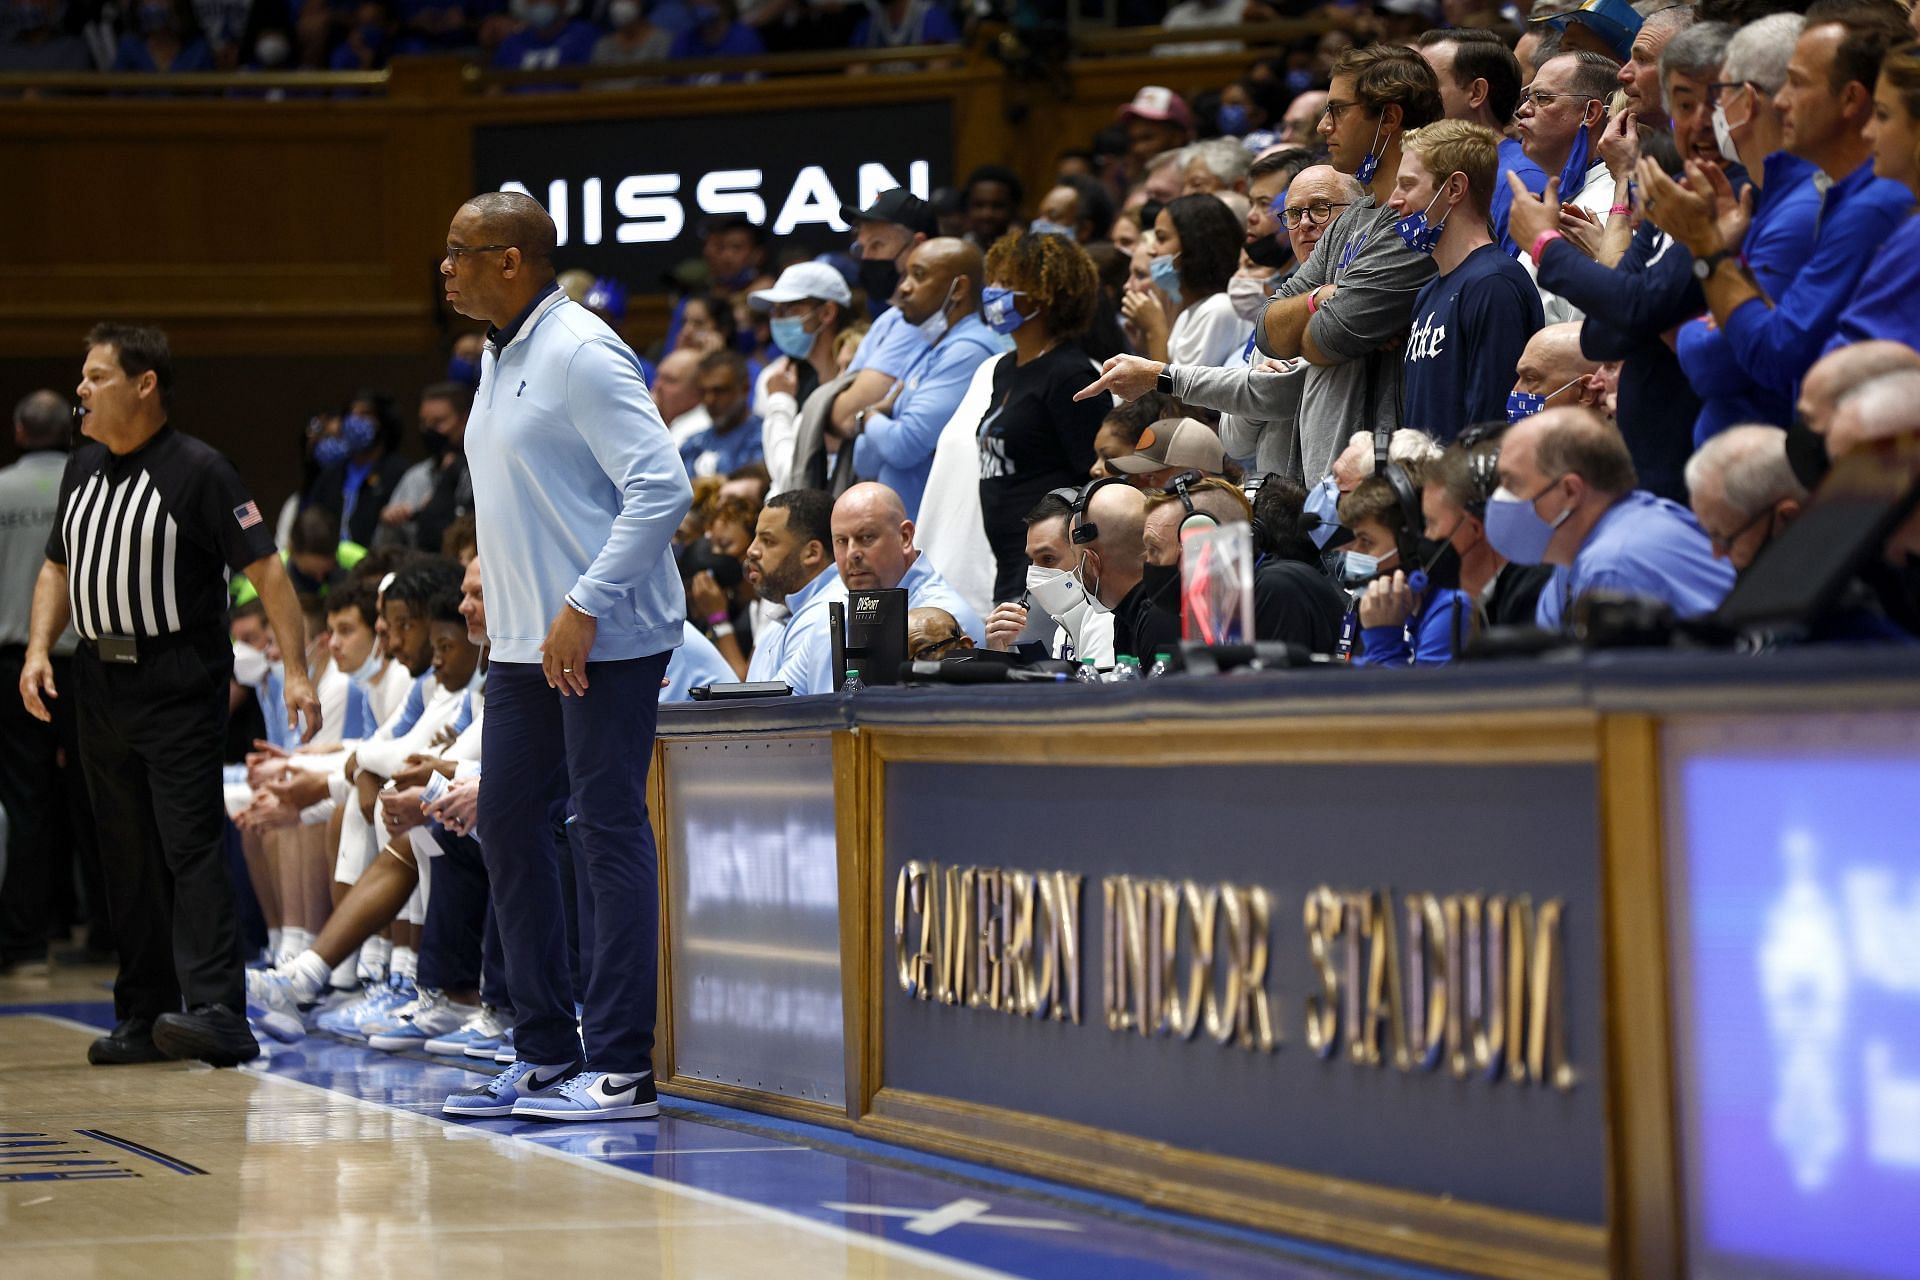 North Carolina&#039;s Hubert Davis will look to spoil one last moment for Coach K and Duke.